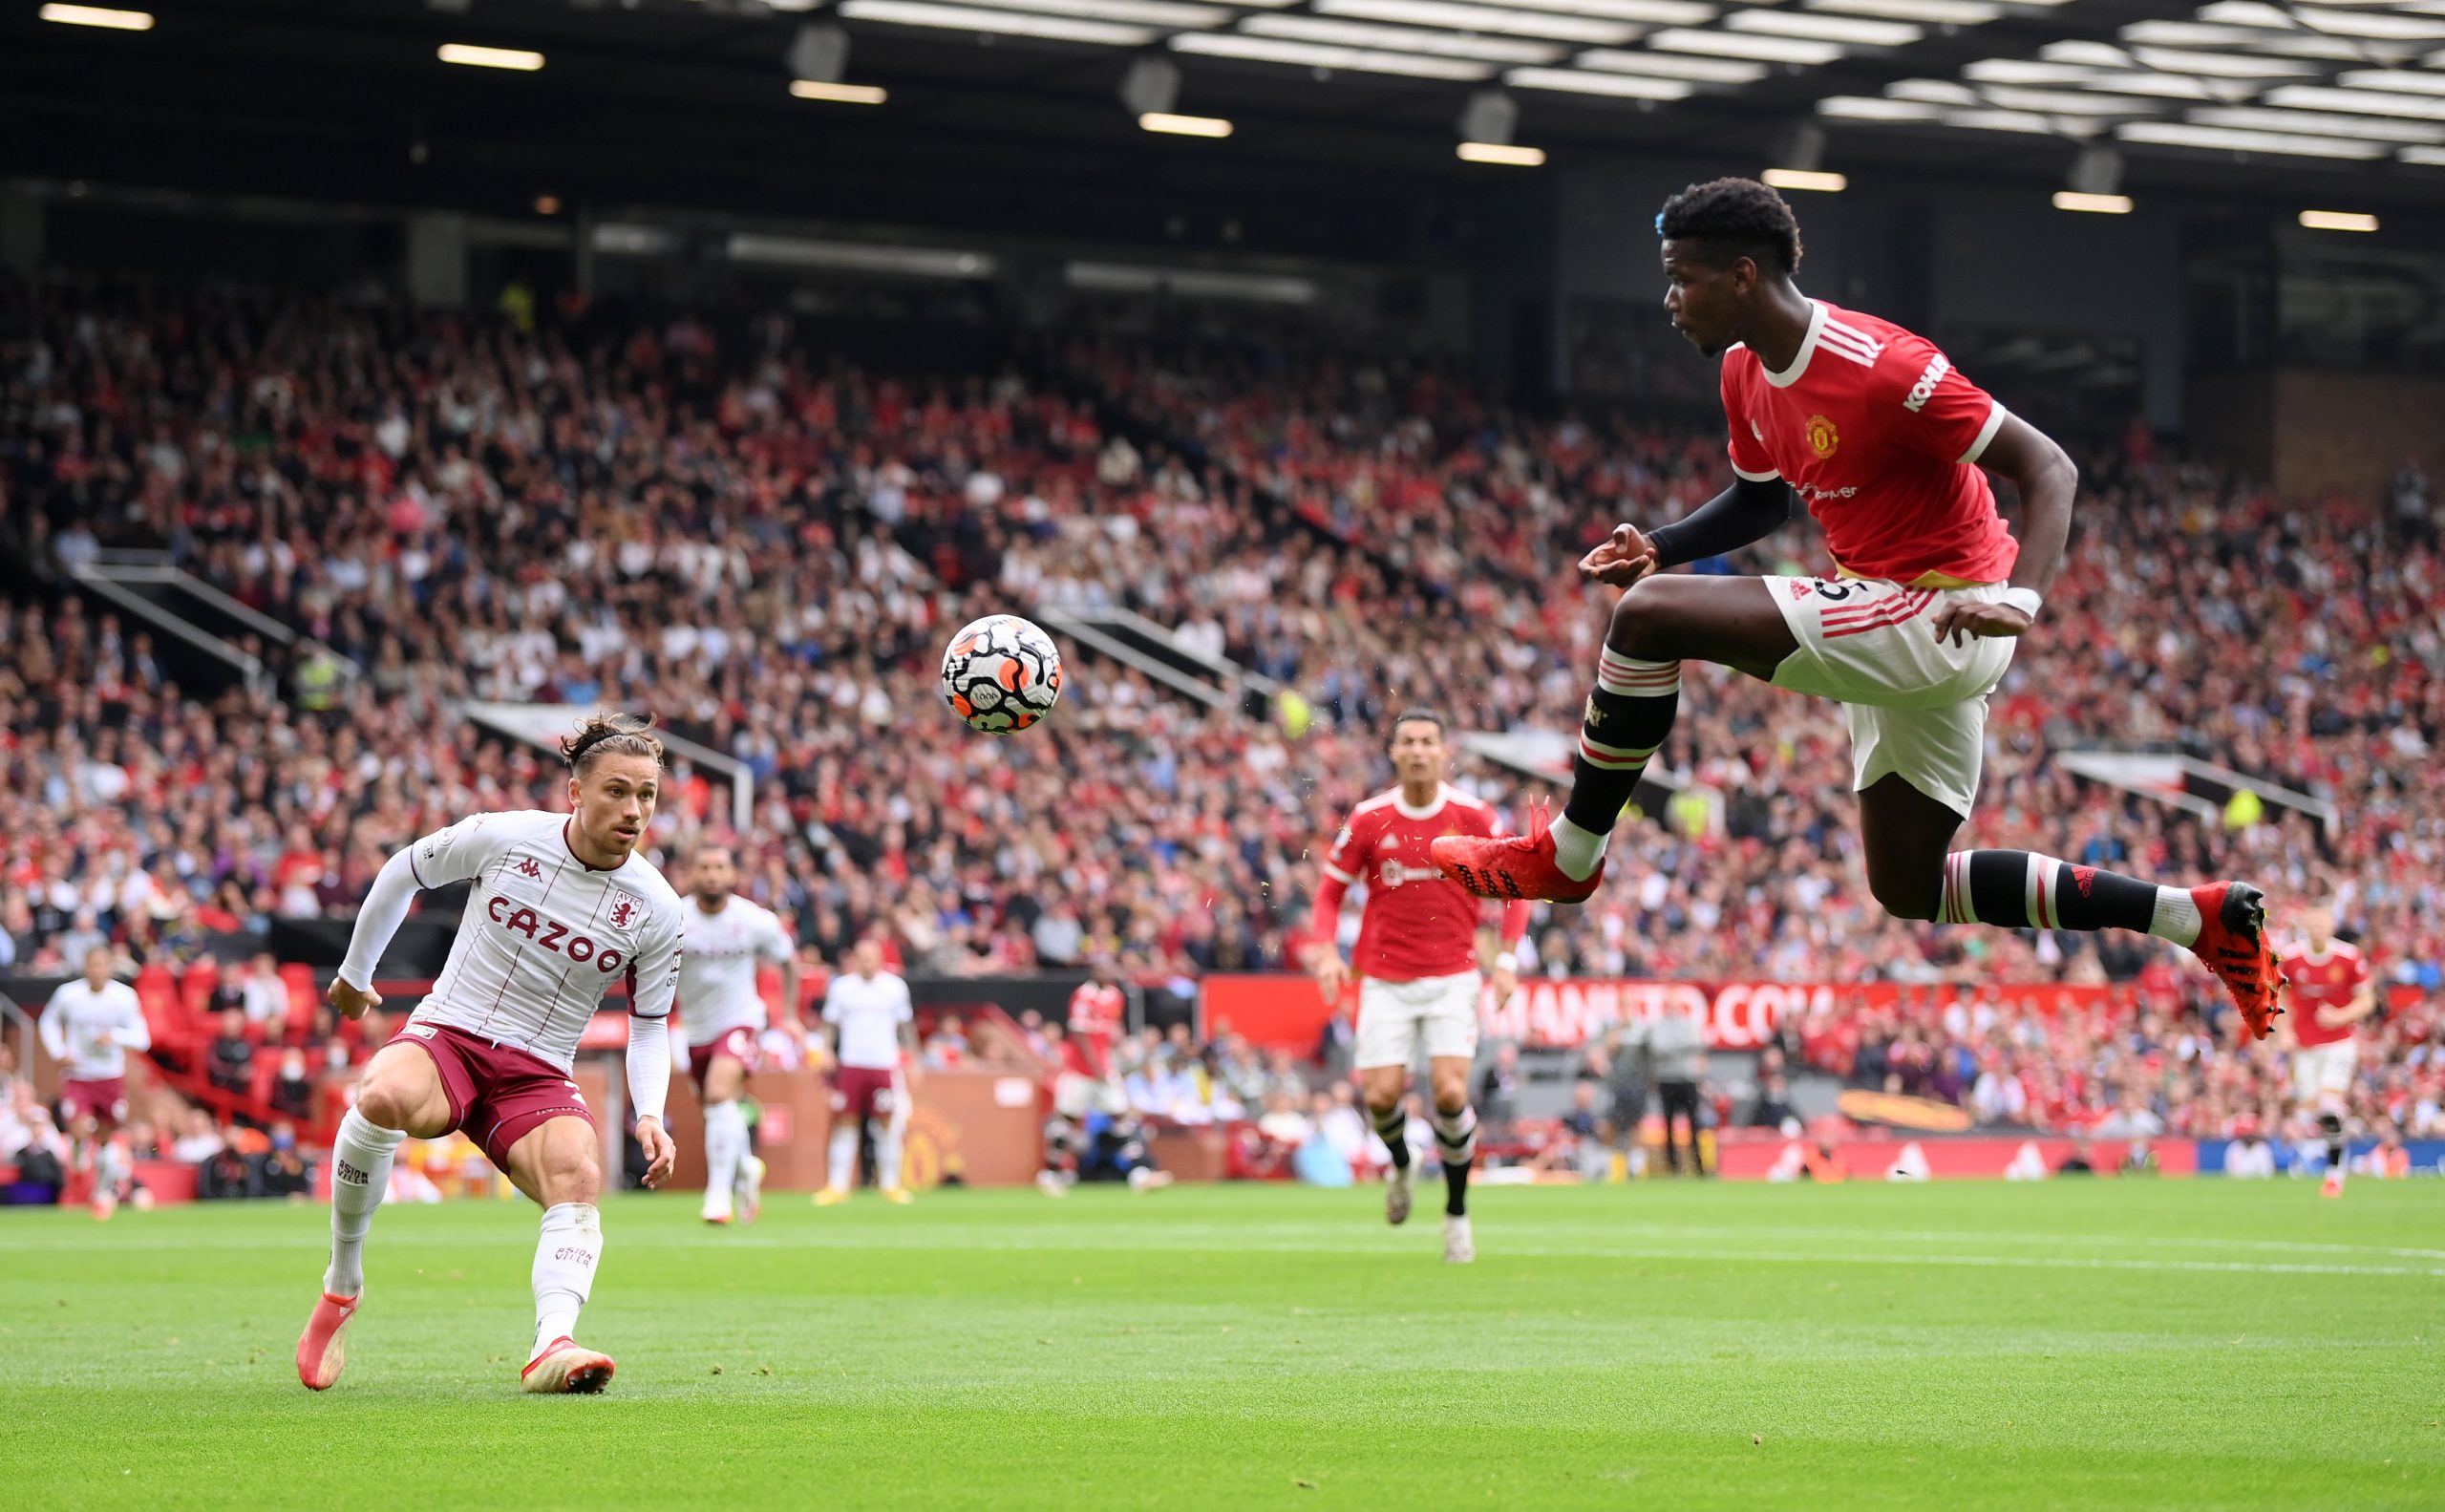 Manchester United star, Paul Pogba. (Photo by Laurence Griffiths/Getty Images)